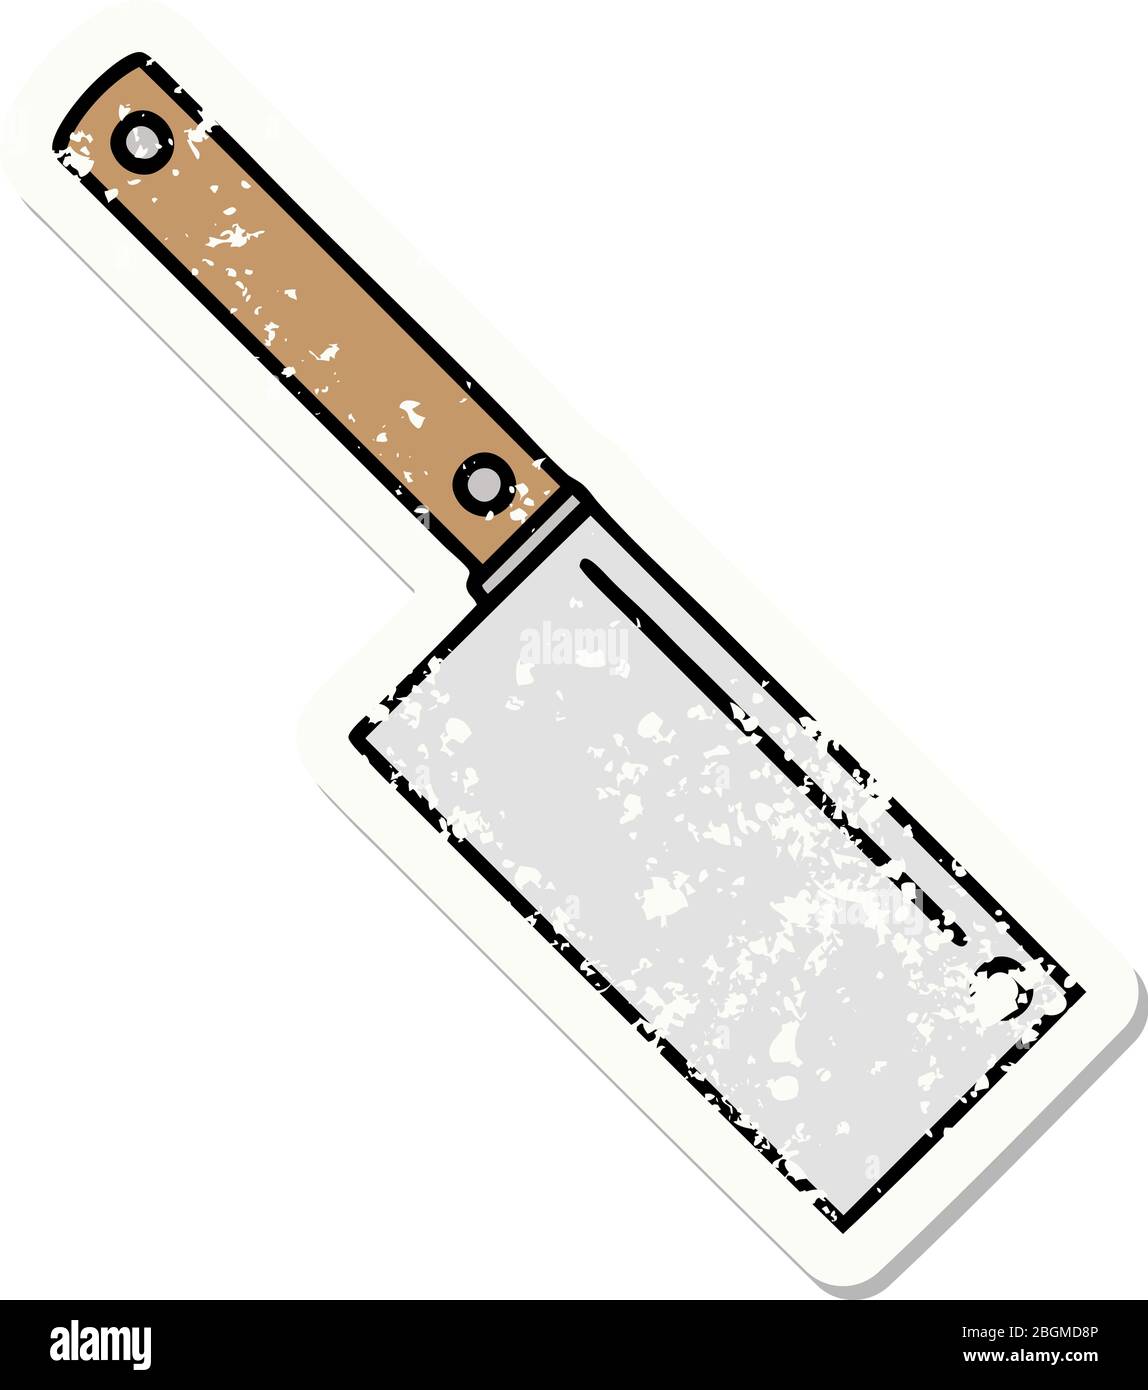 distressed sticker tattoo in traditional style of a meat cleaver 2BGMD8P